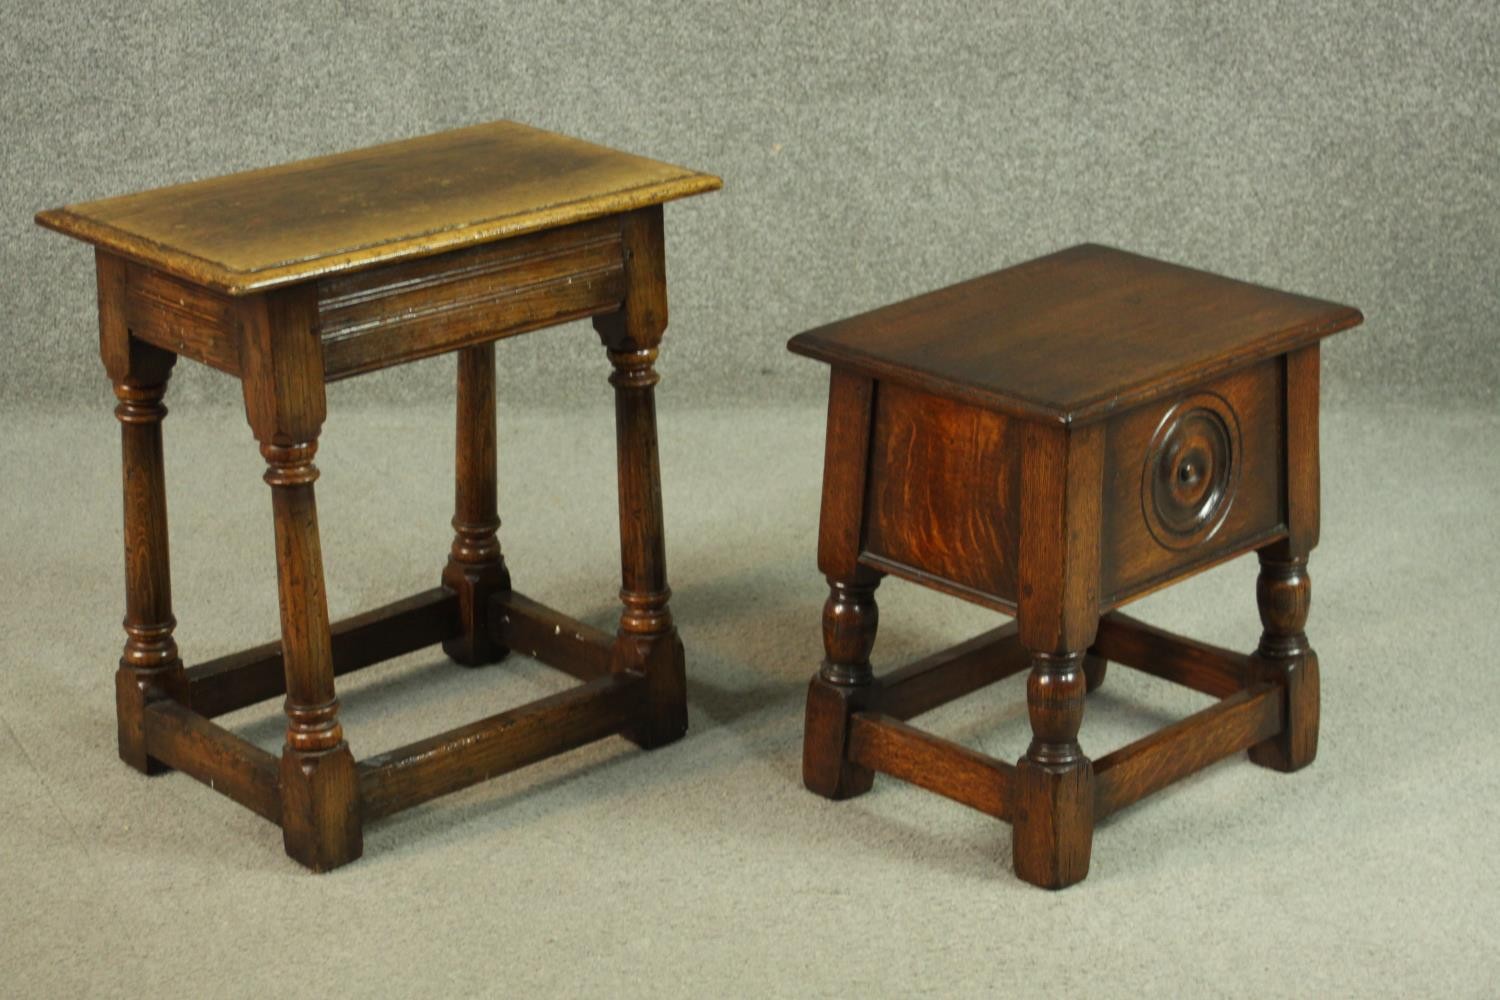 Two oak joint stools, 20th century, both rectangular, on turned legs with stretchers, one with a - Image 3 of 6